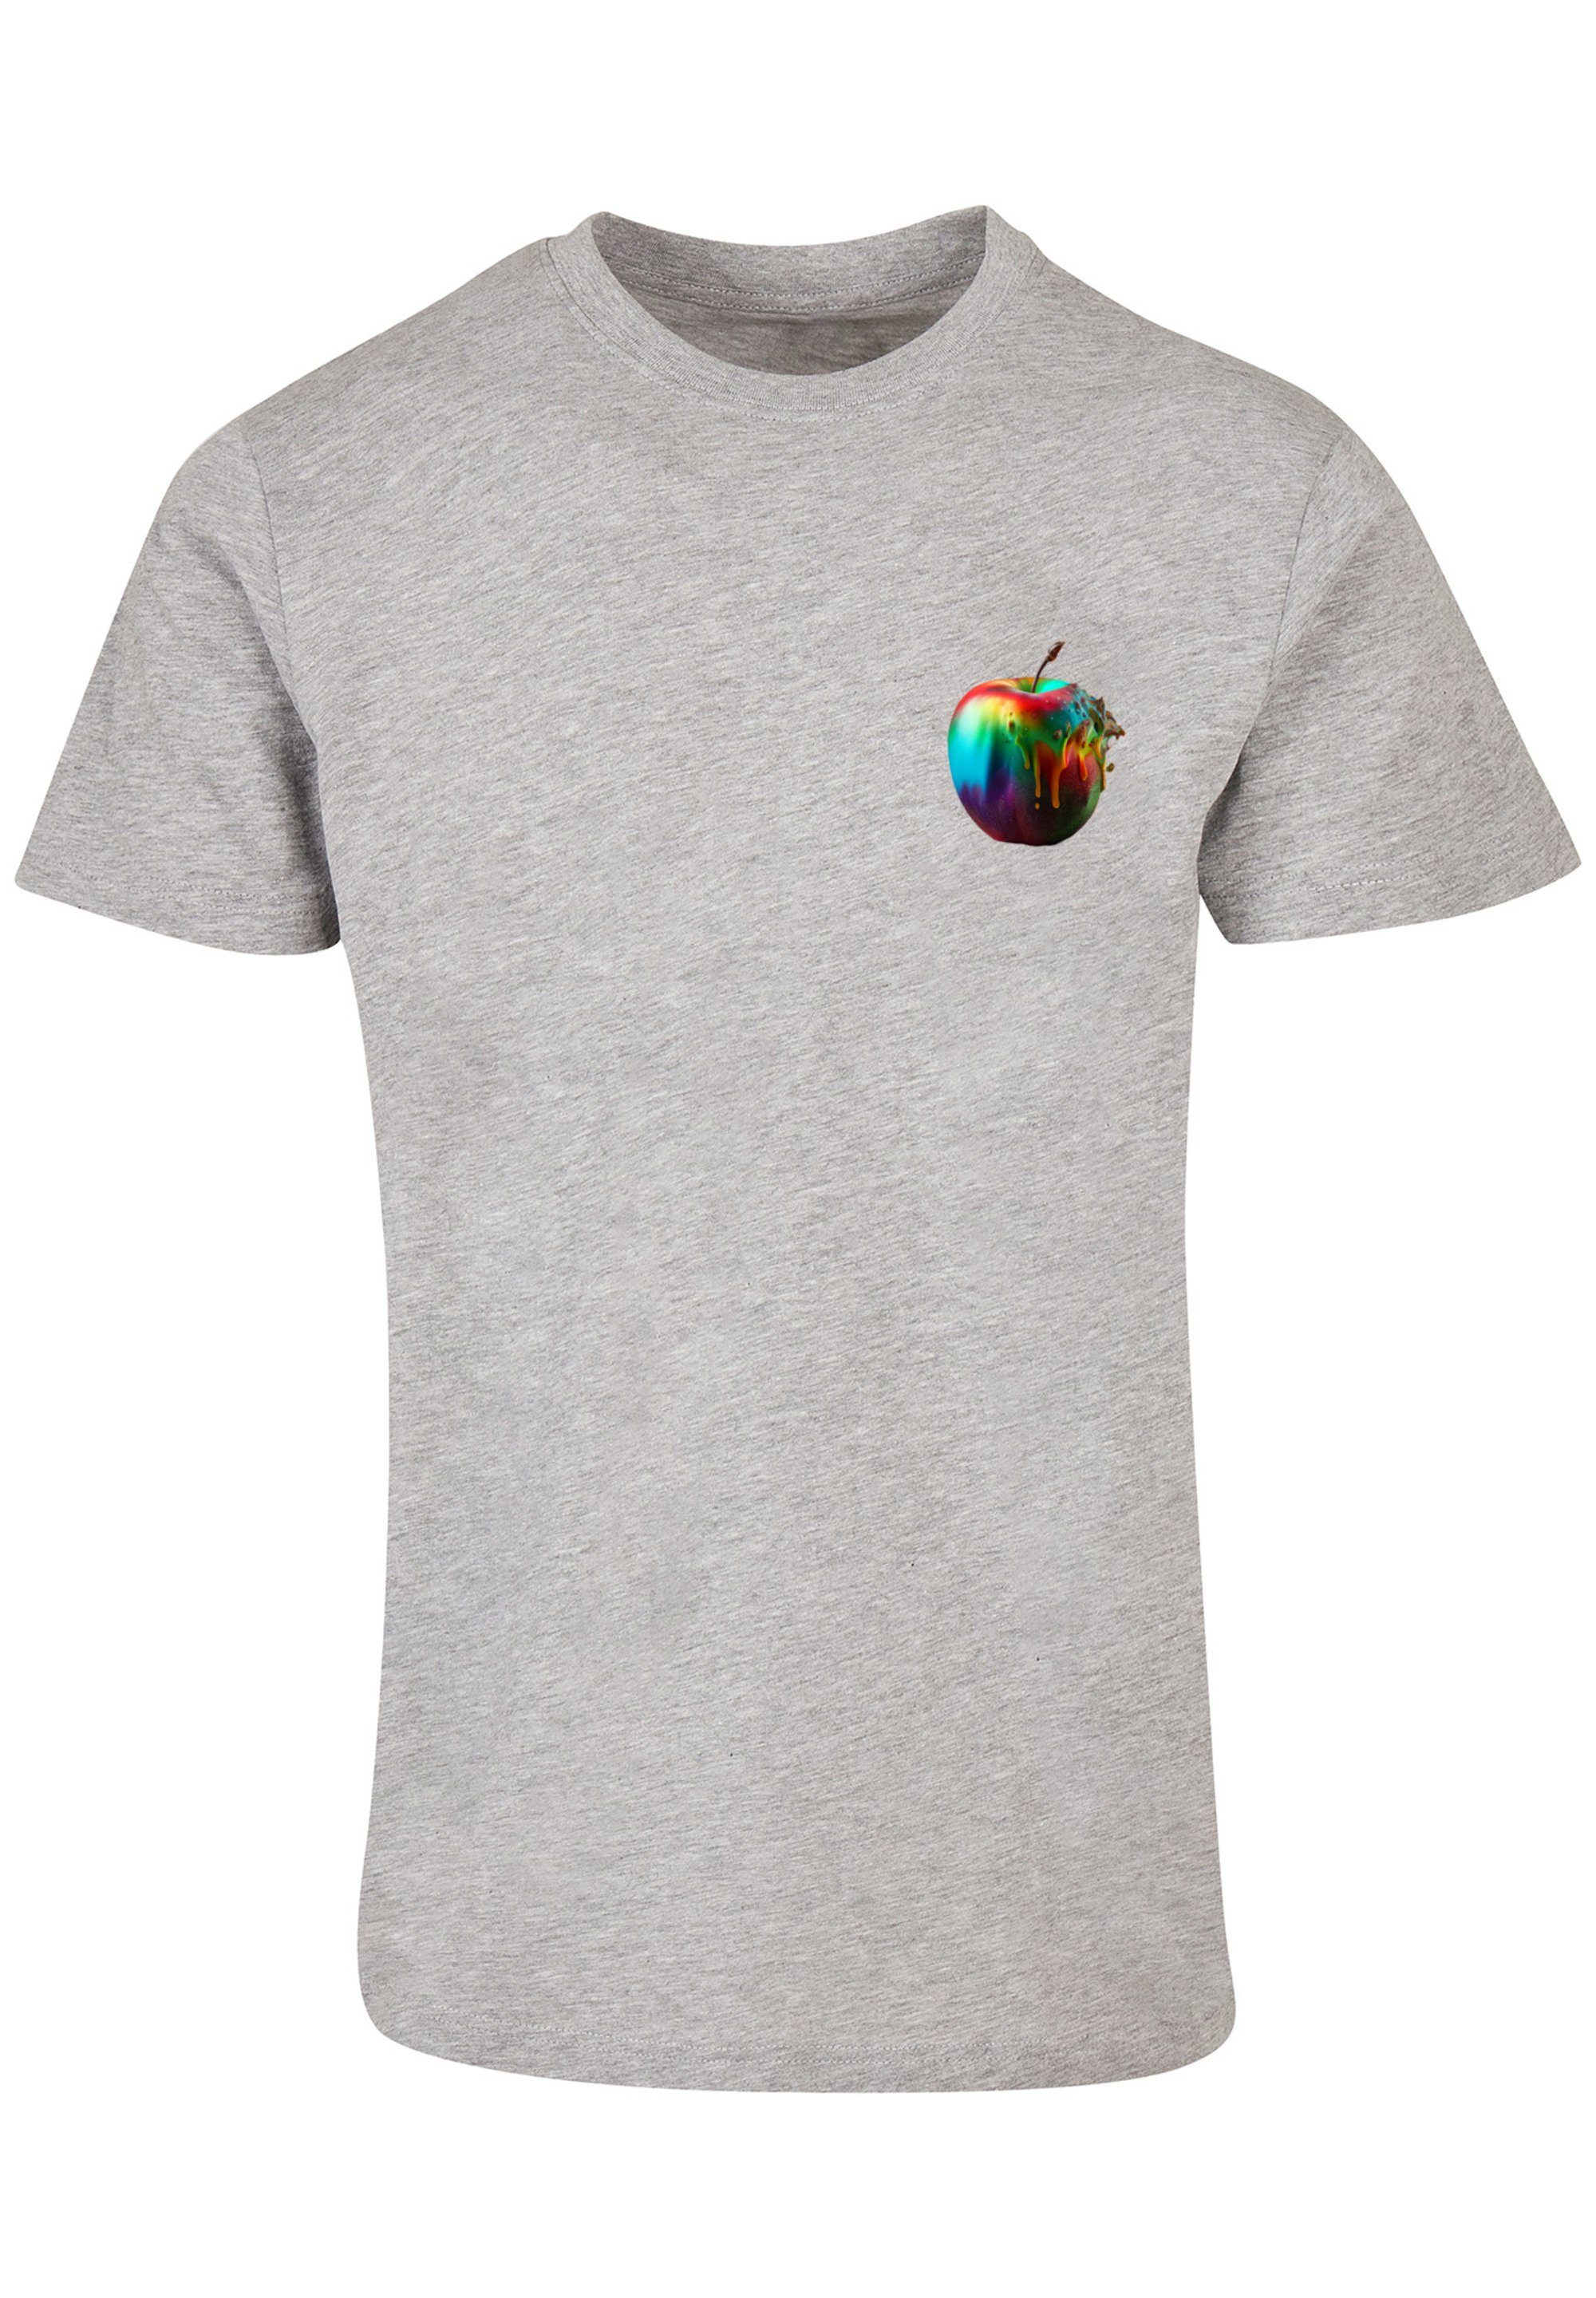 F4NT4STIC T-Shirt Colorfood Collection Apple Print grey - Rainbow heather